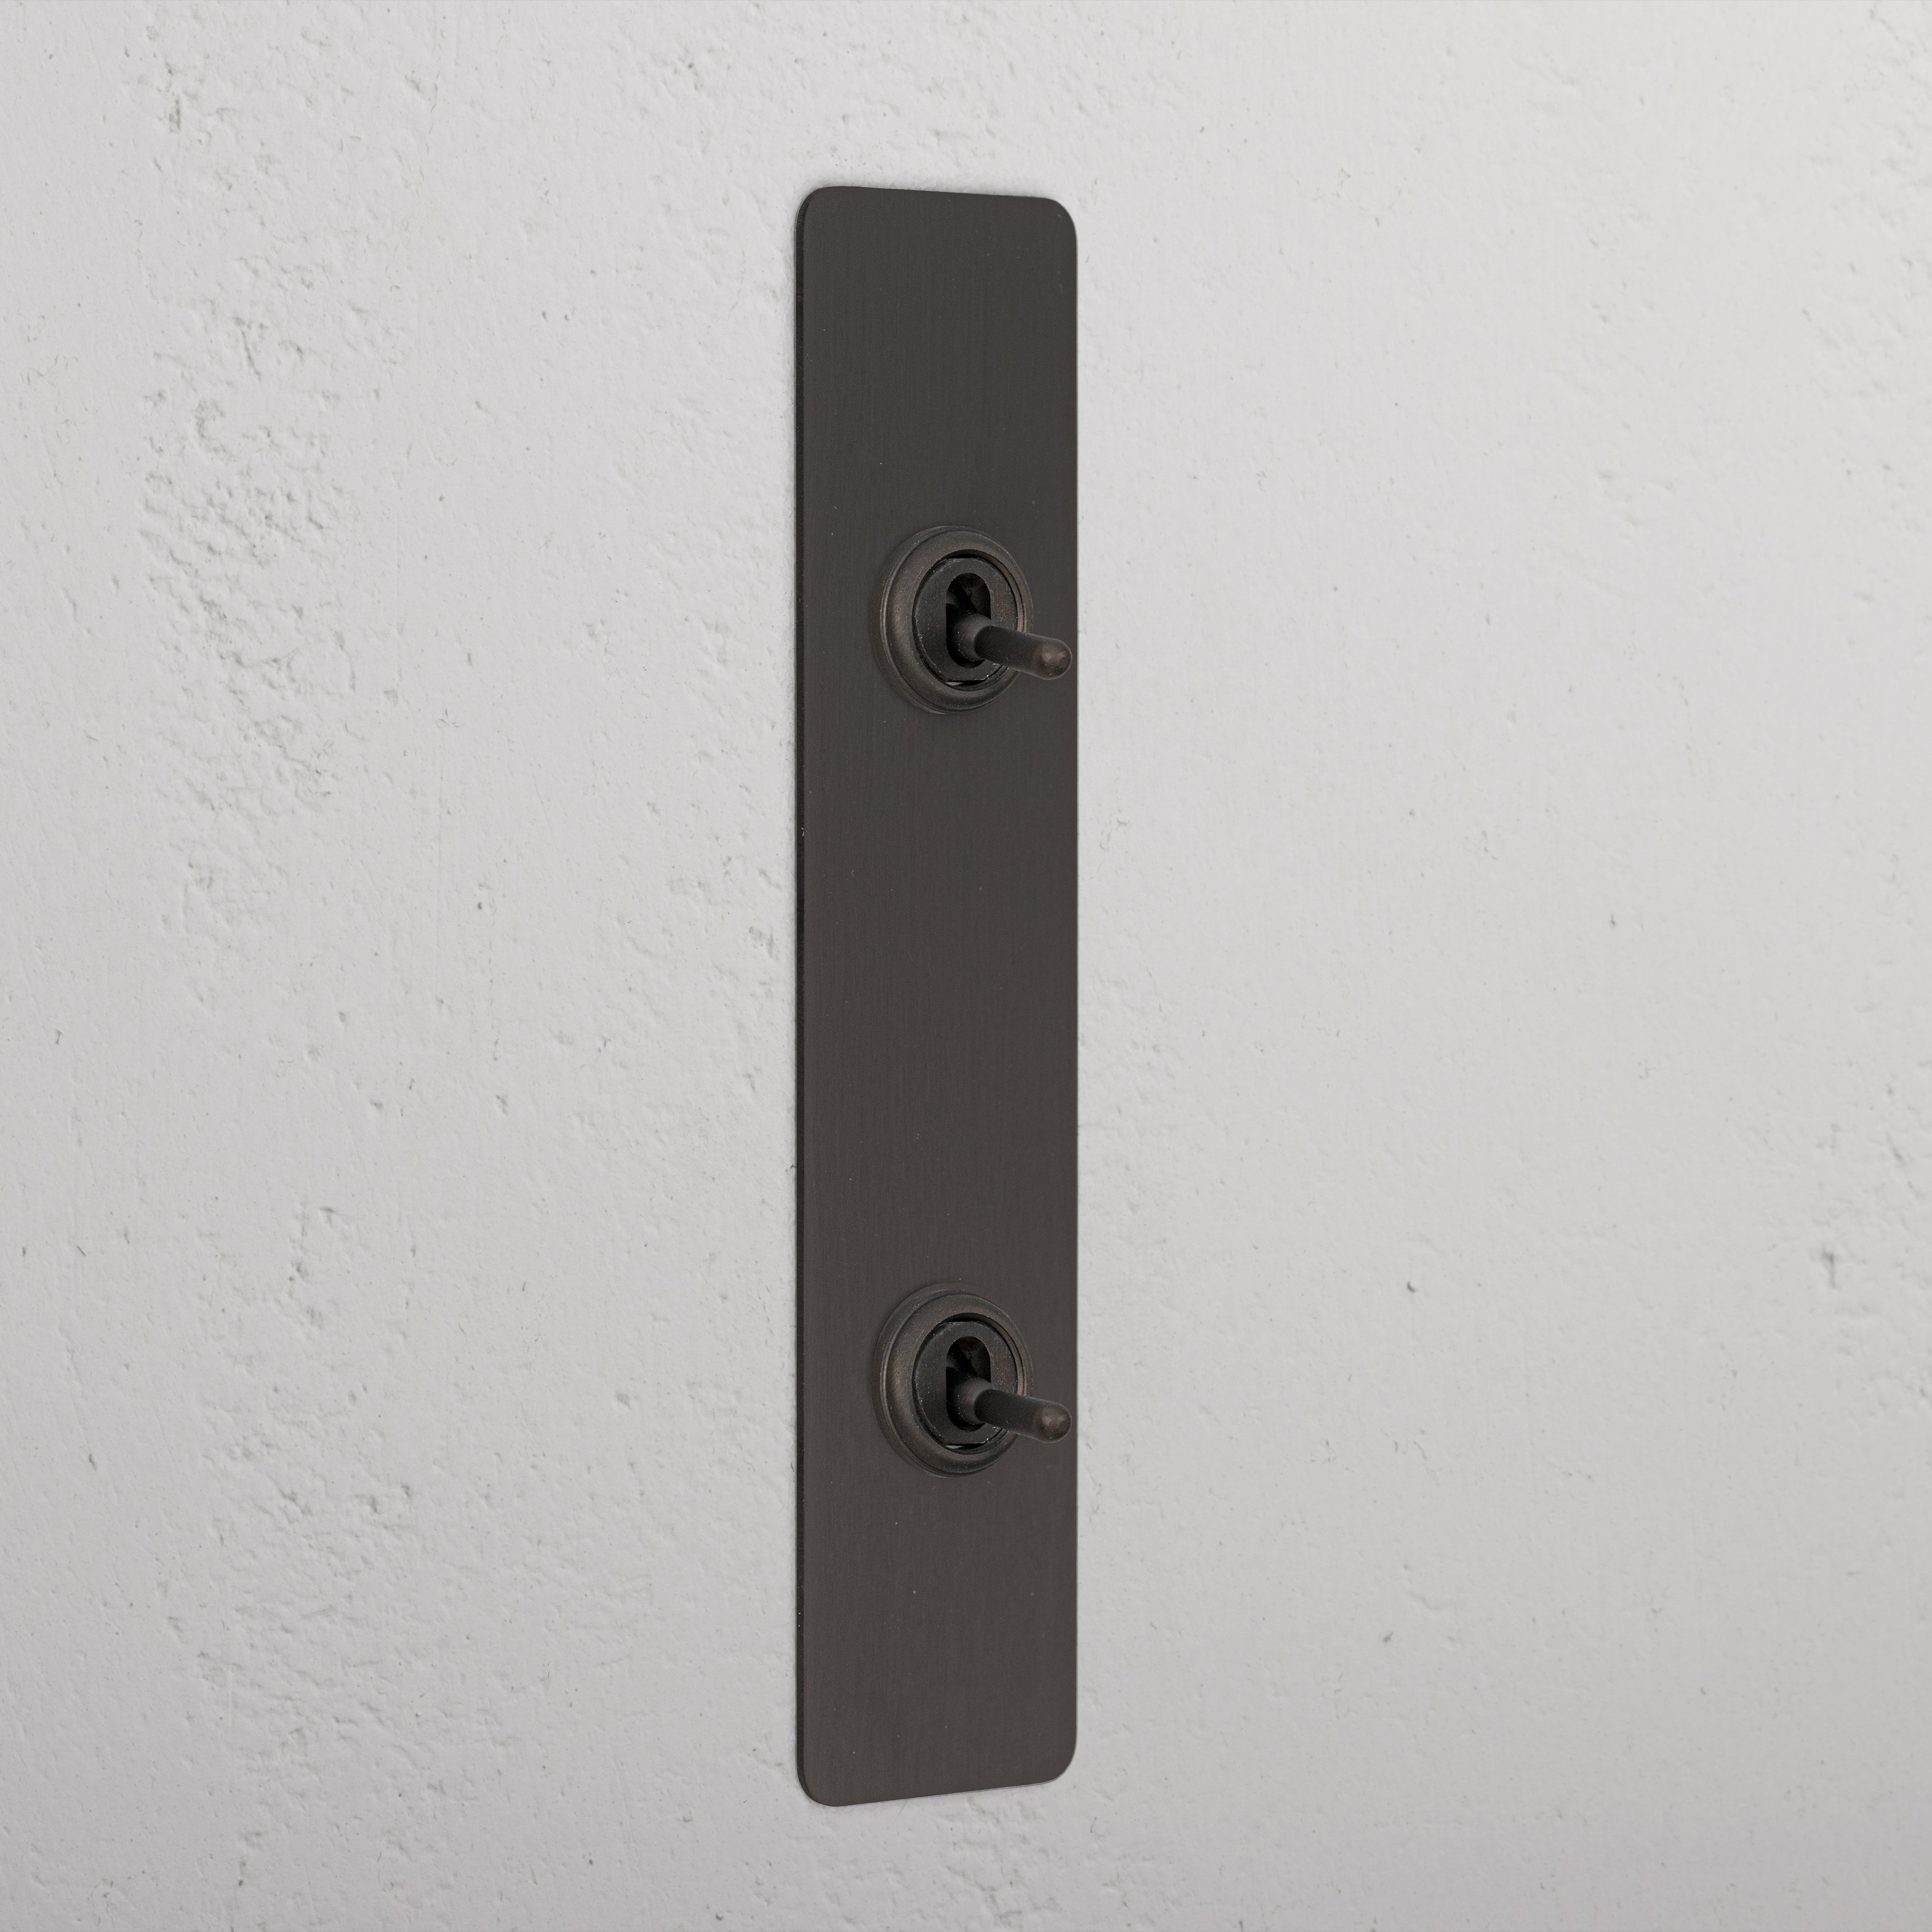 2G Architrave Two Way Toggle Switch - Bronze  